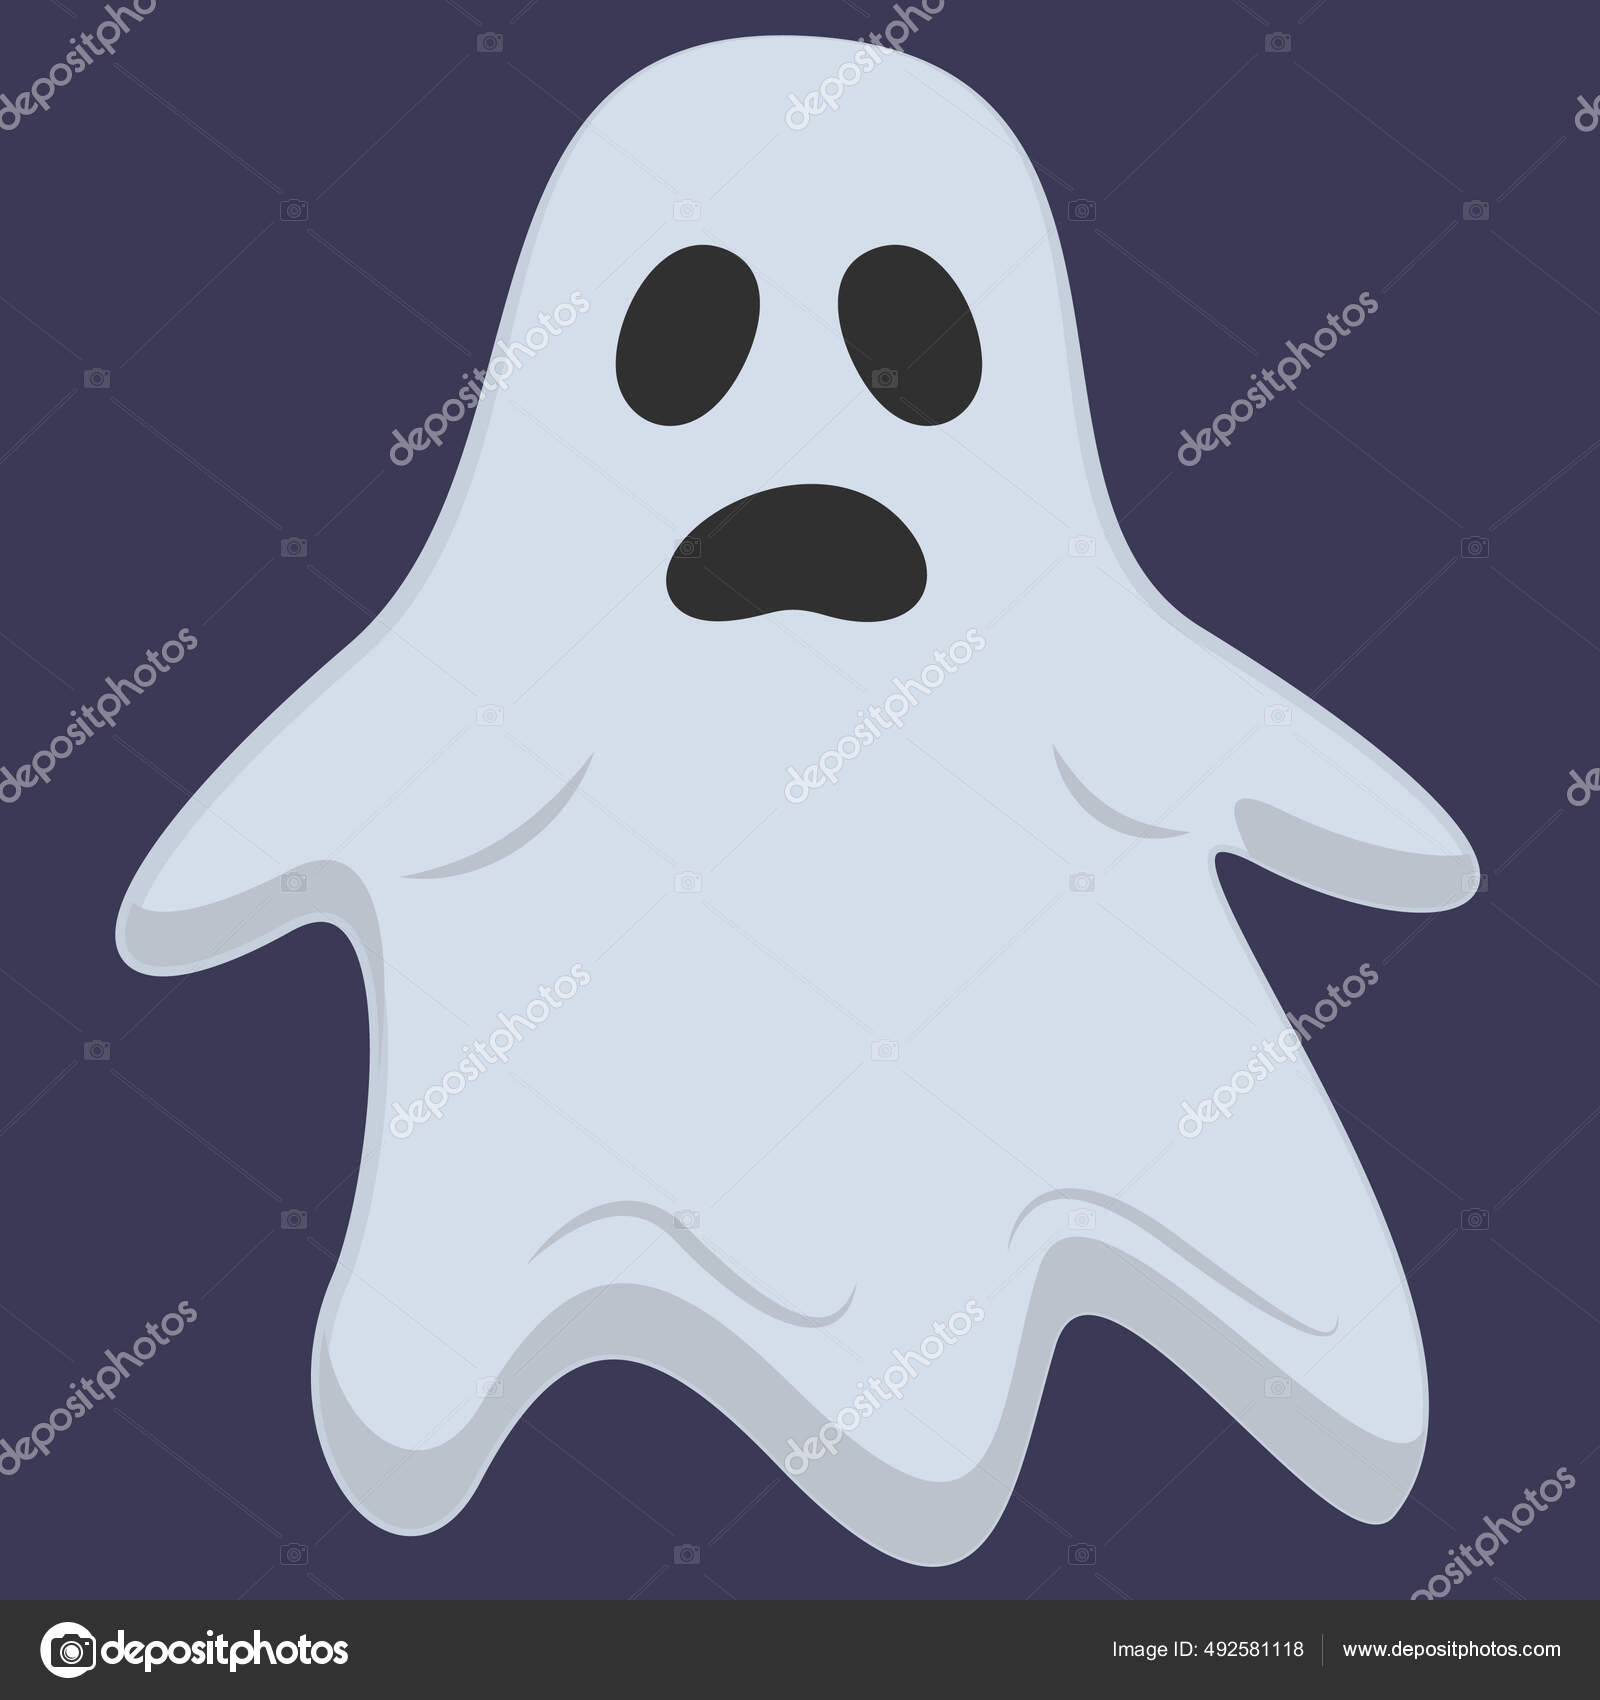 Scary ghost Vector Art Stock Images | Depositphotos